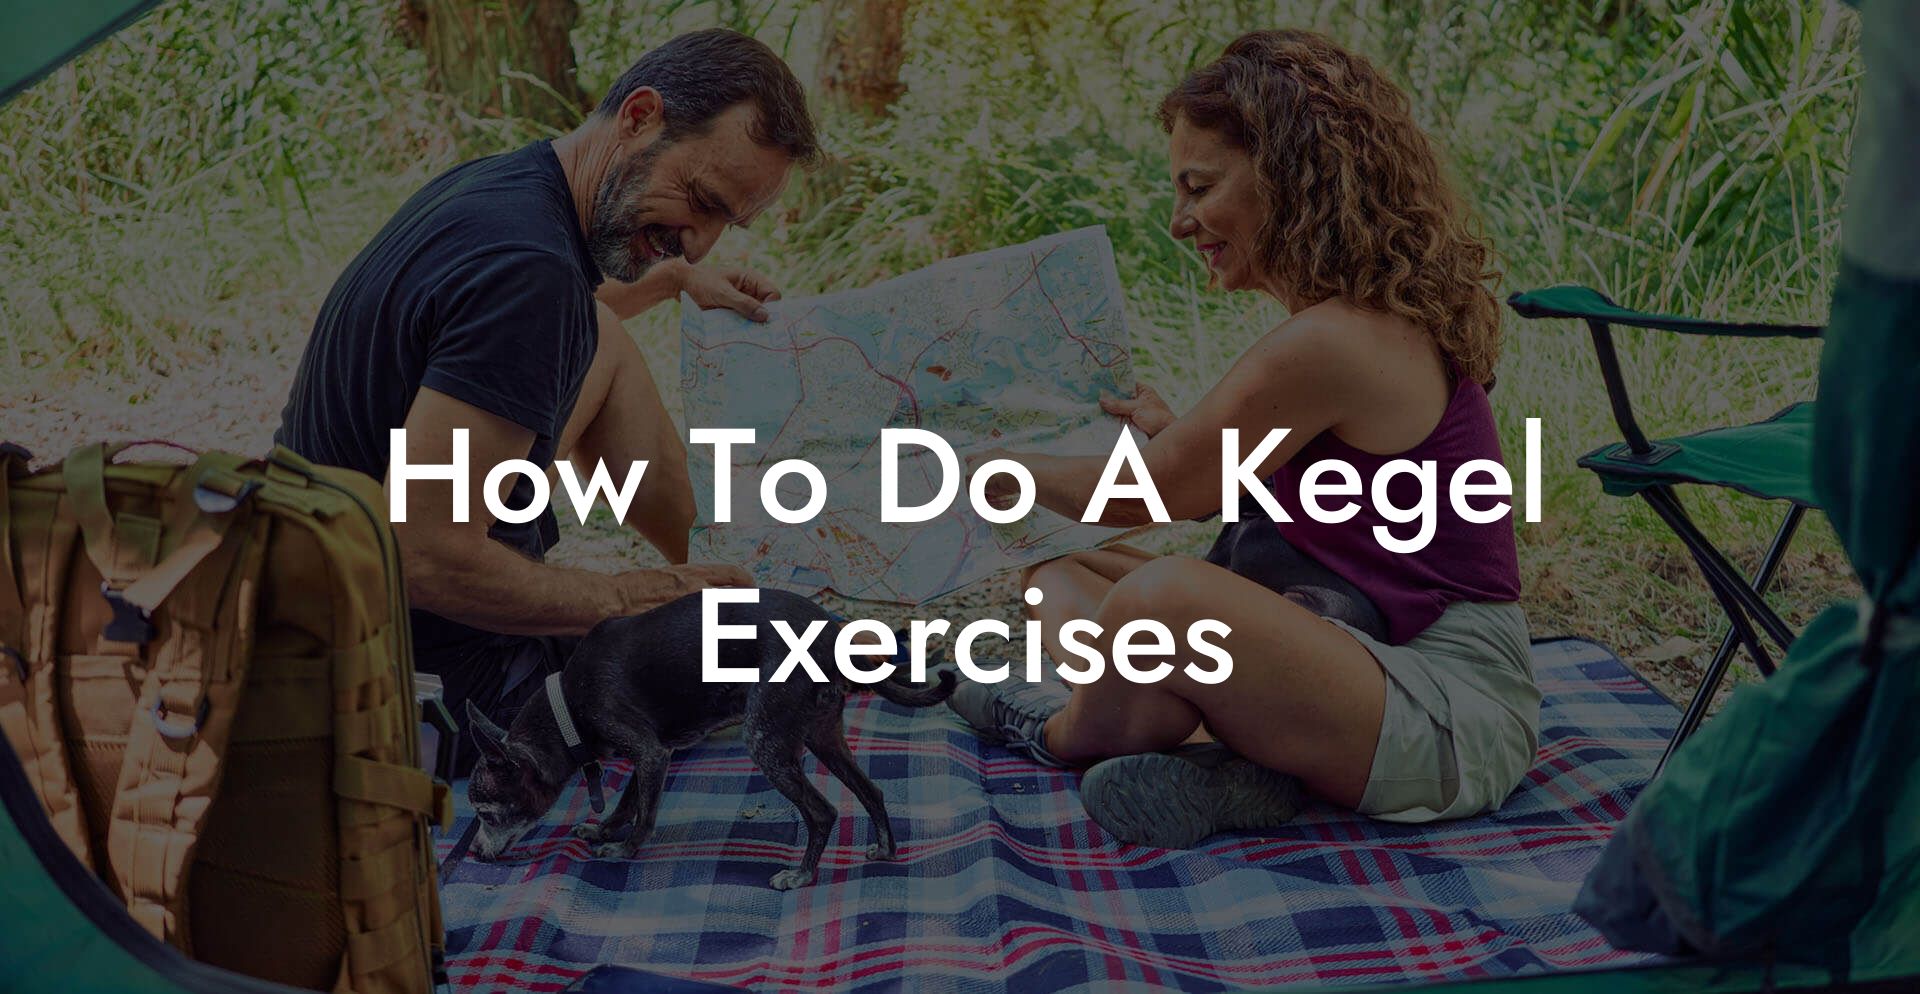 How To Do A Kegel Exercises